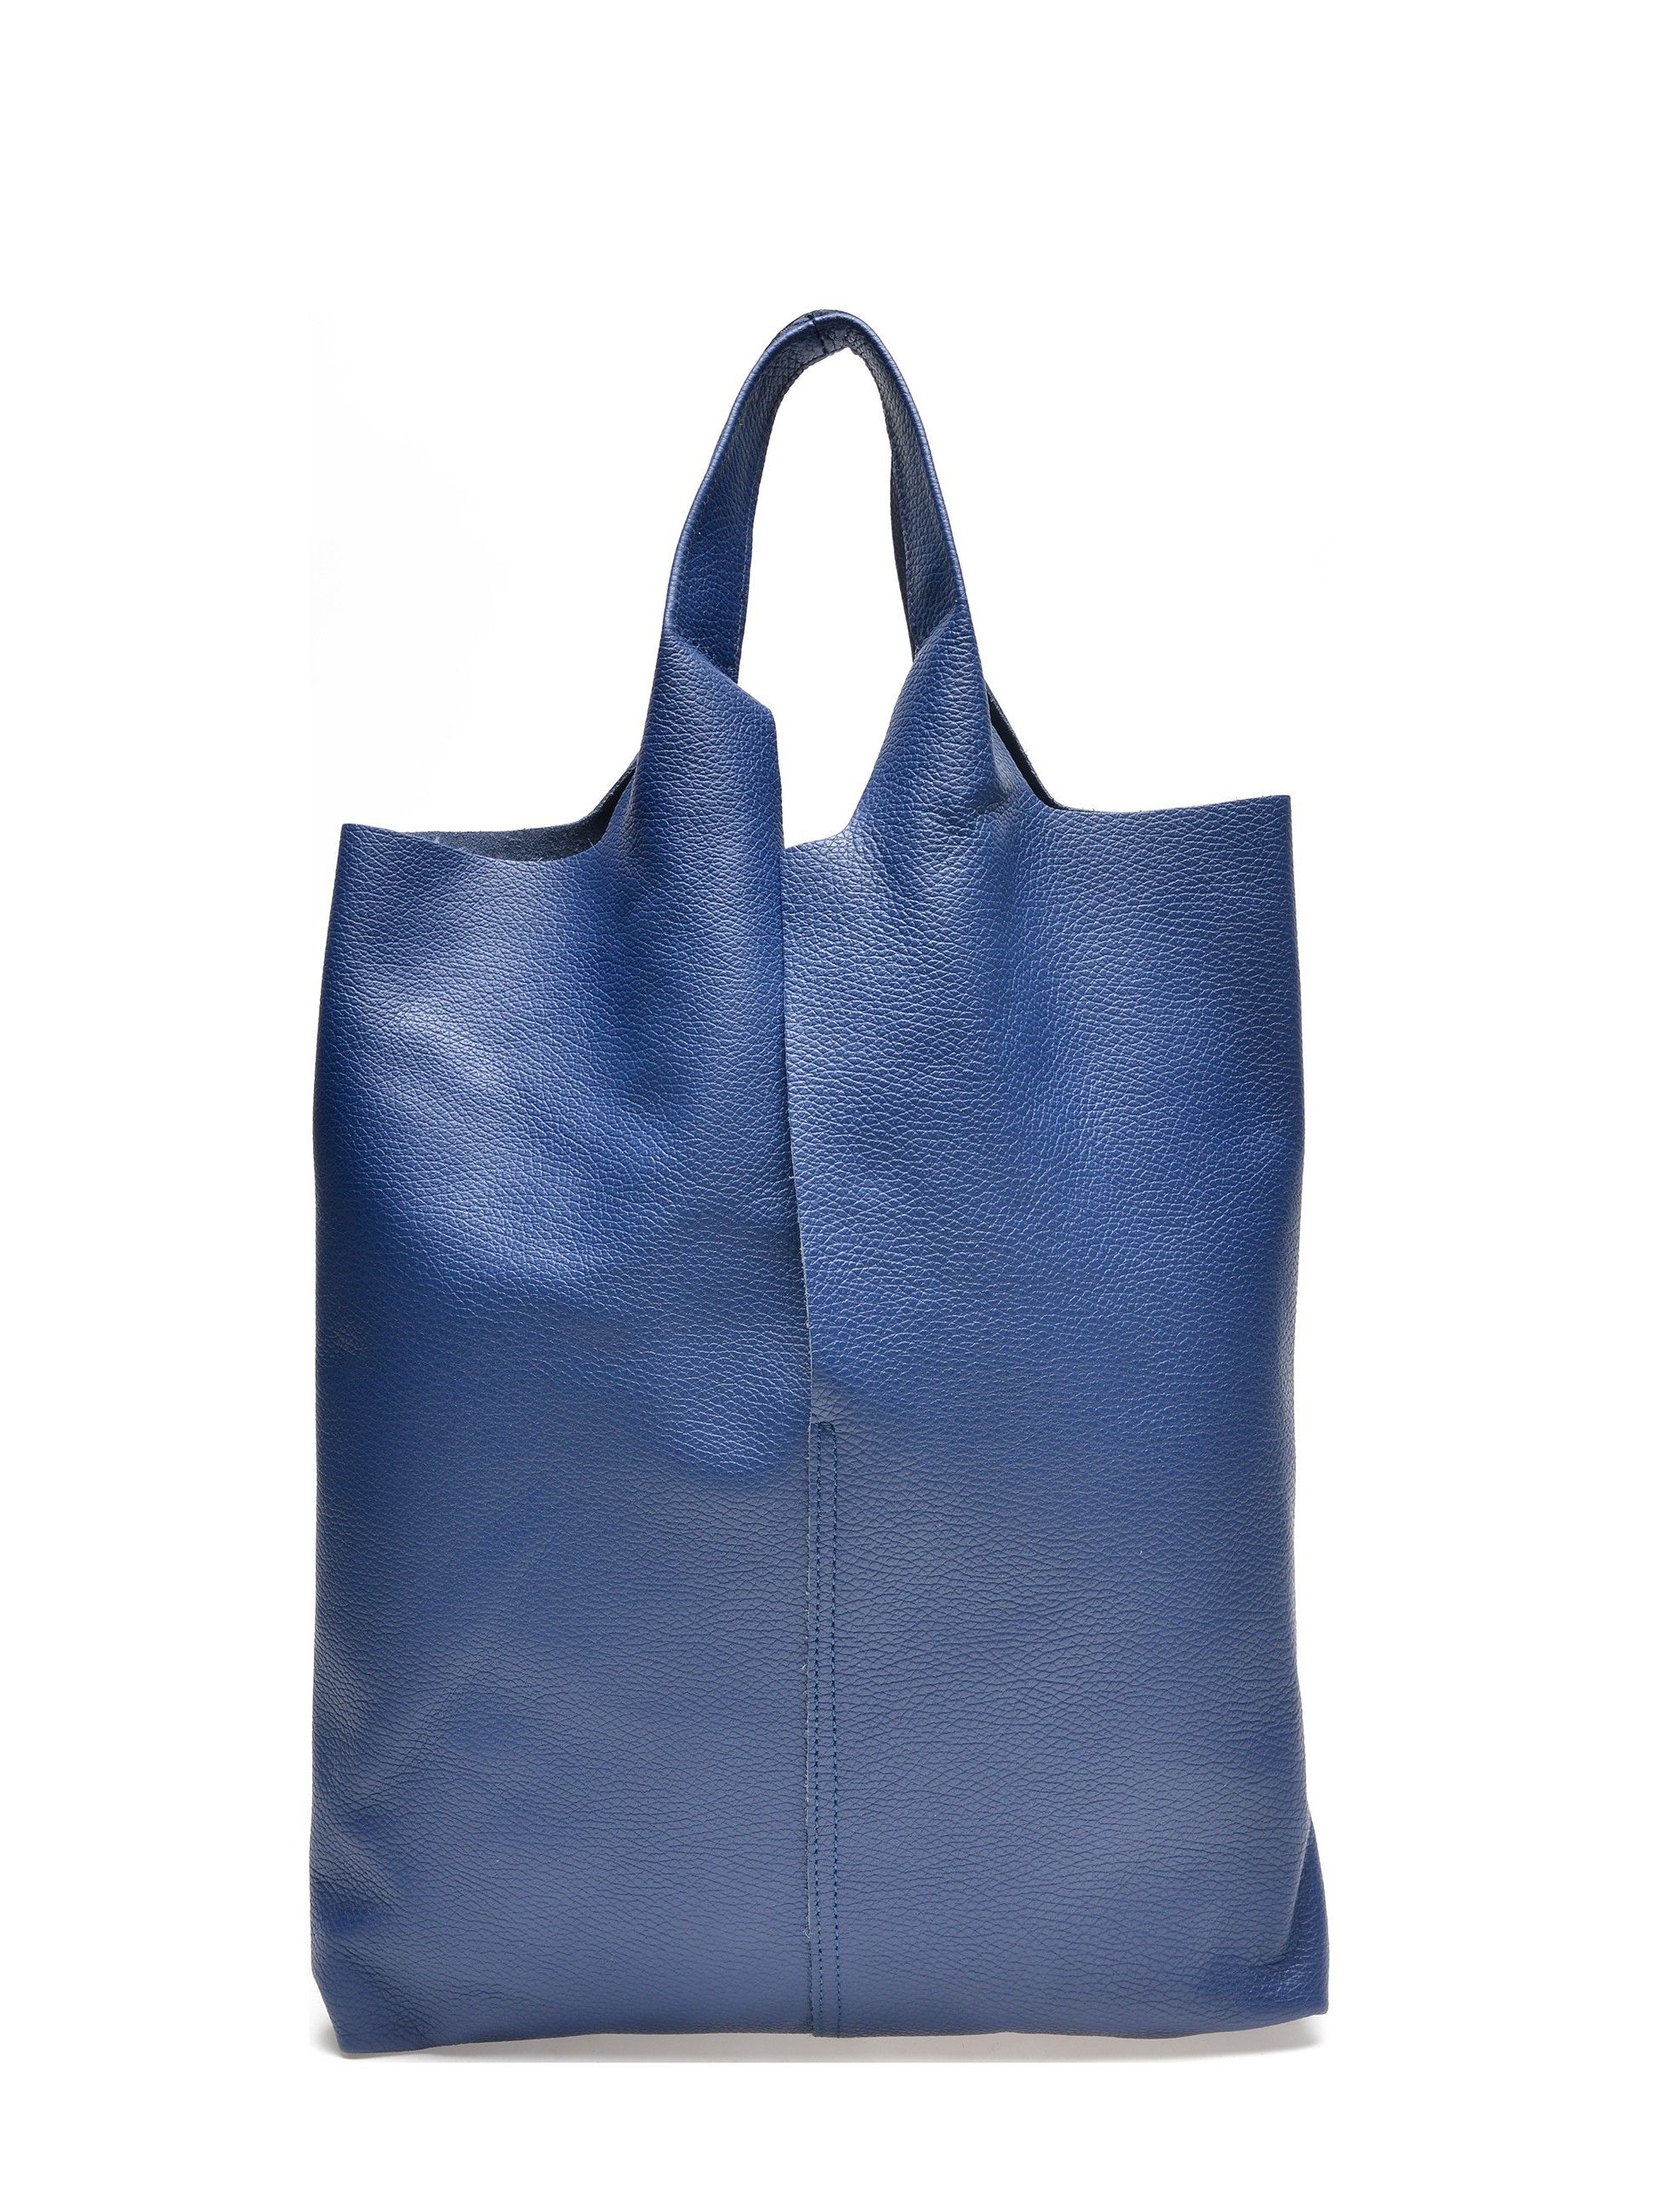 Shopper Bag
100% cow leather
Two top handles: 30 cm
Interior zip pocket
Dimensions: 42x38xcm